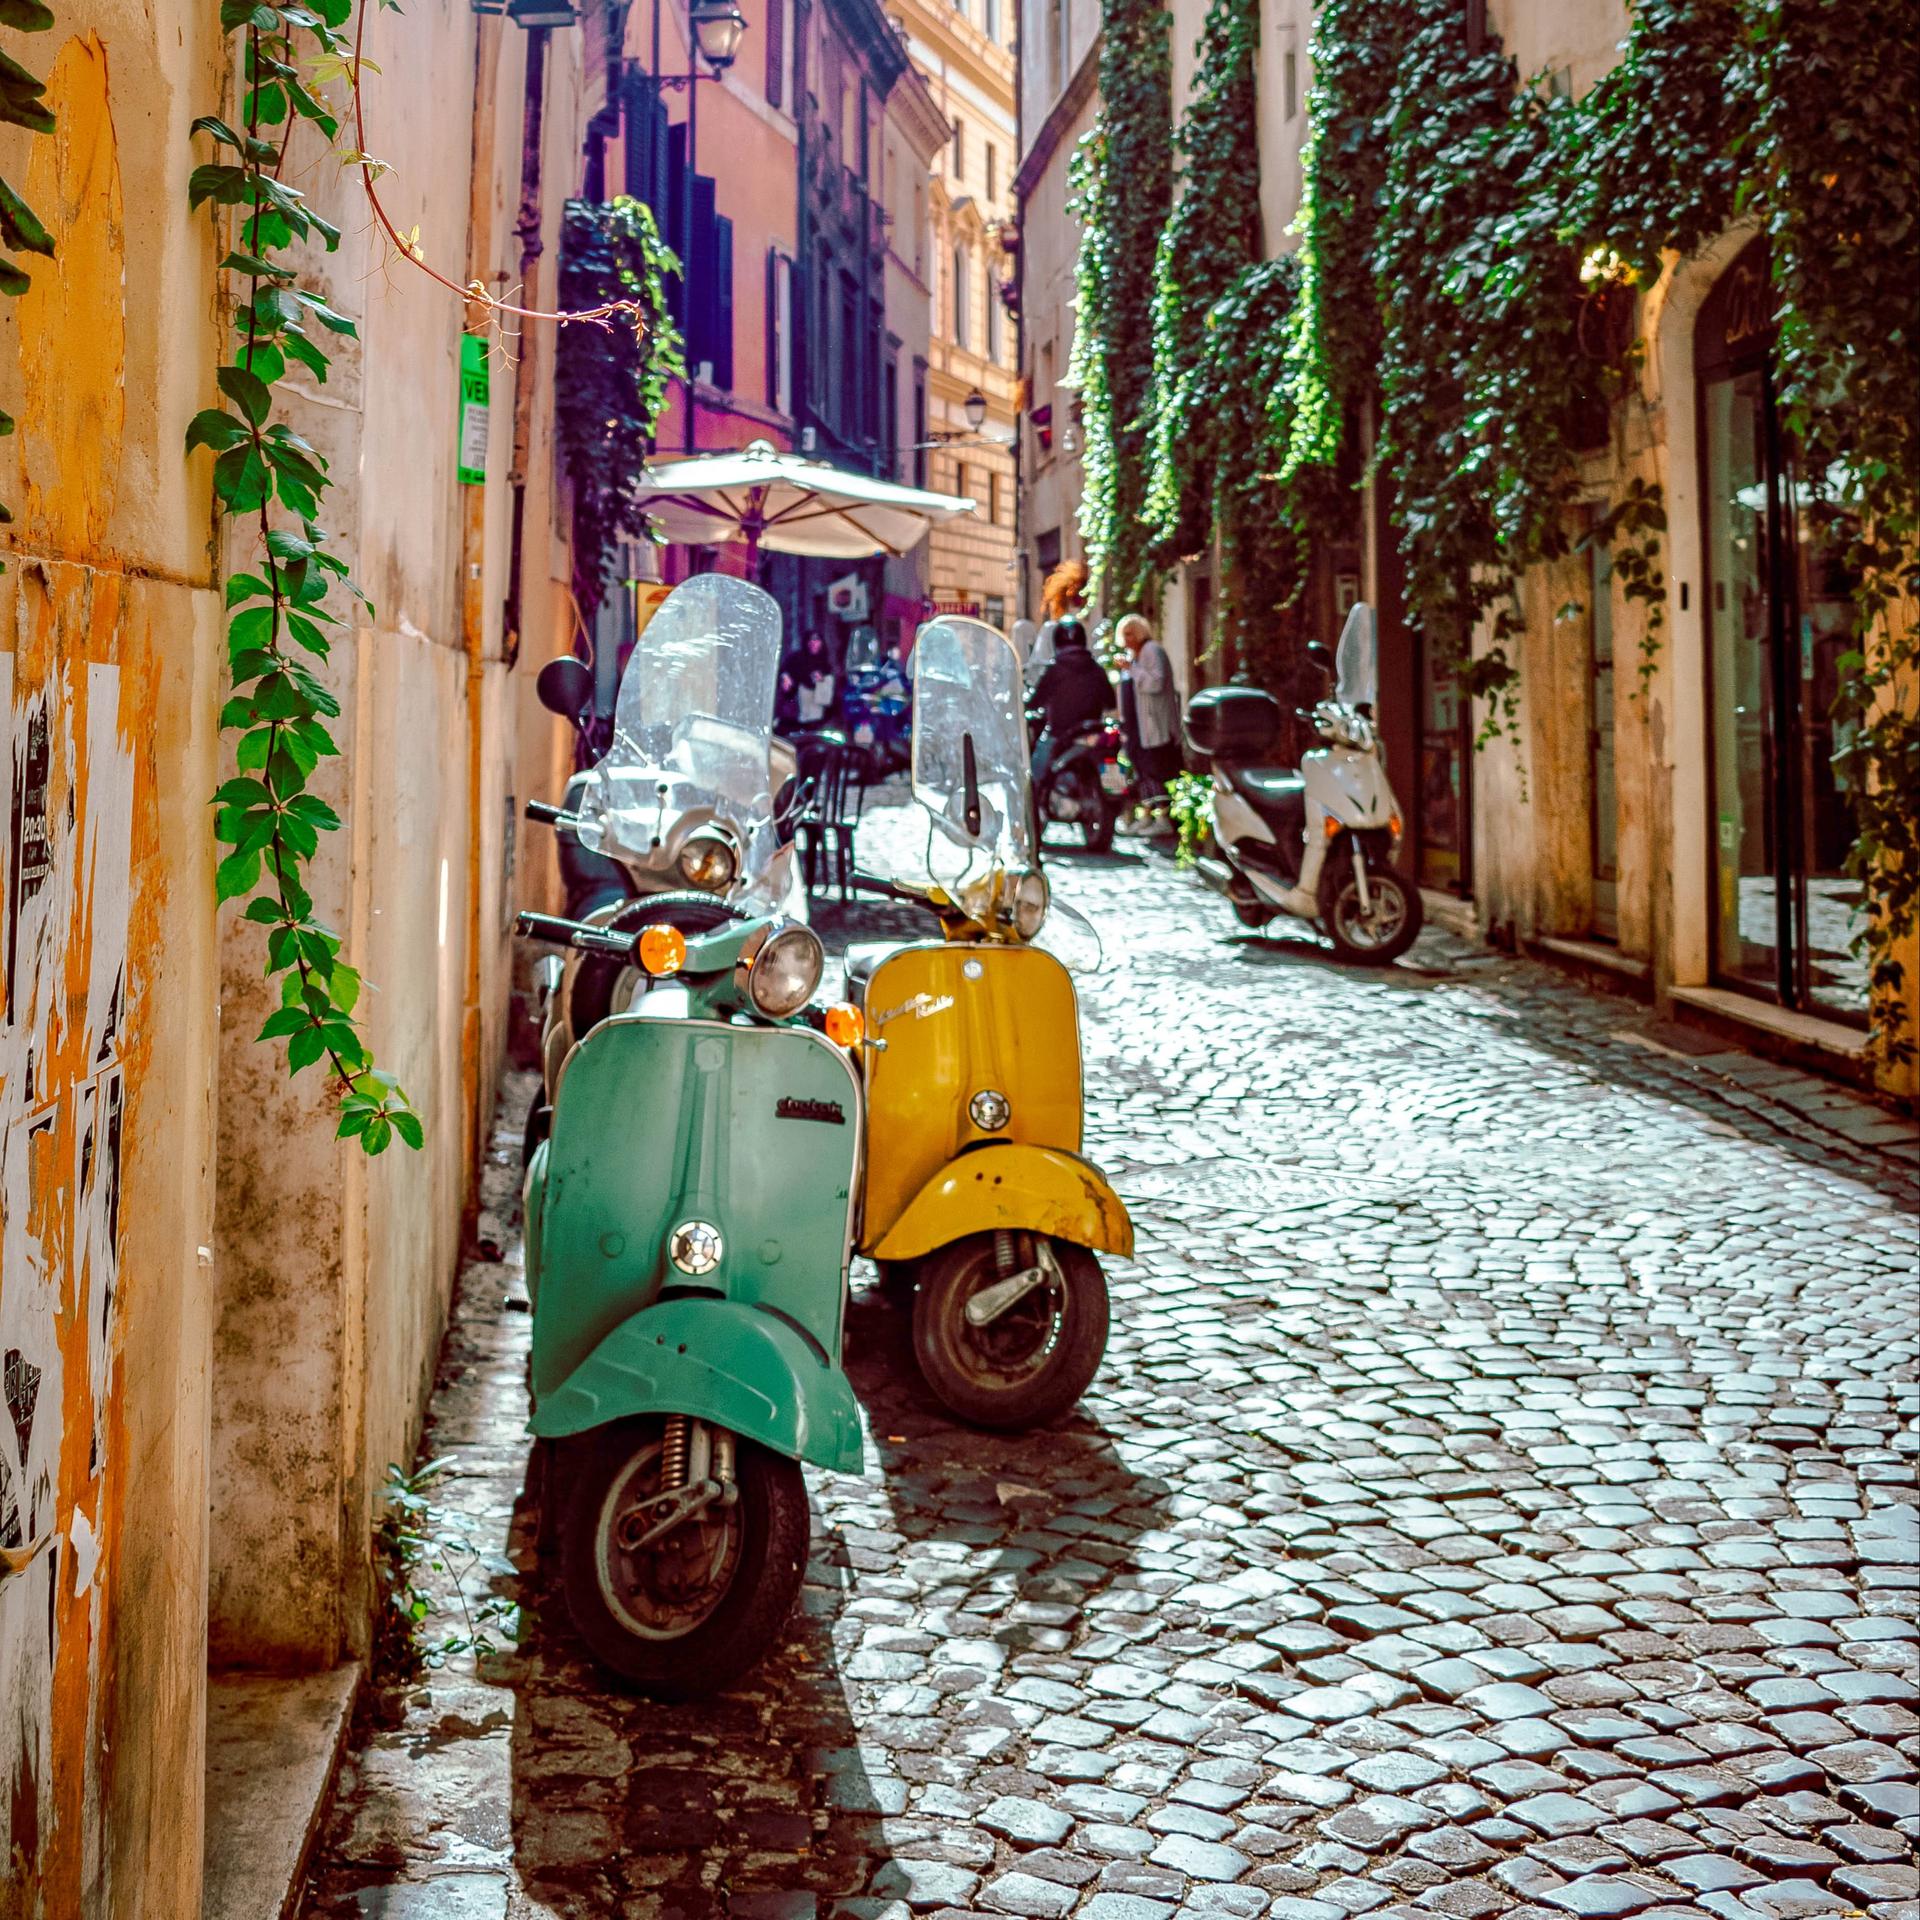 A pair of vespas parked on a street in Italy